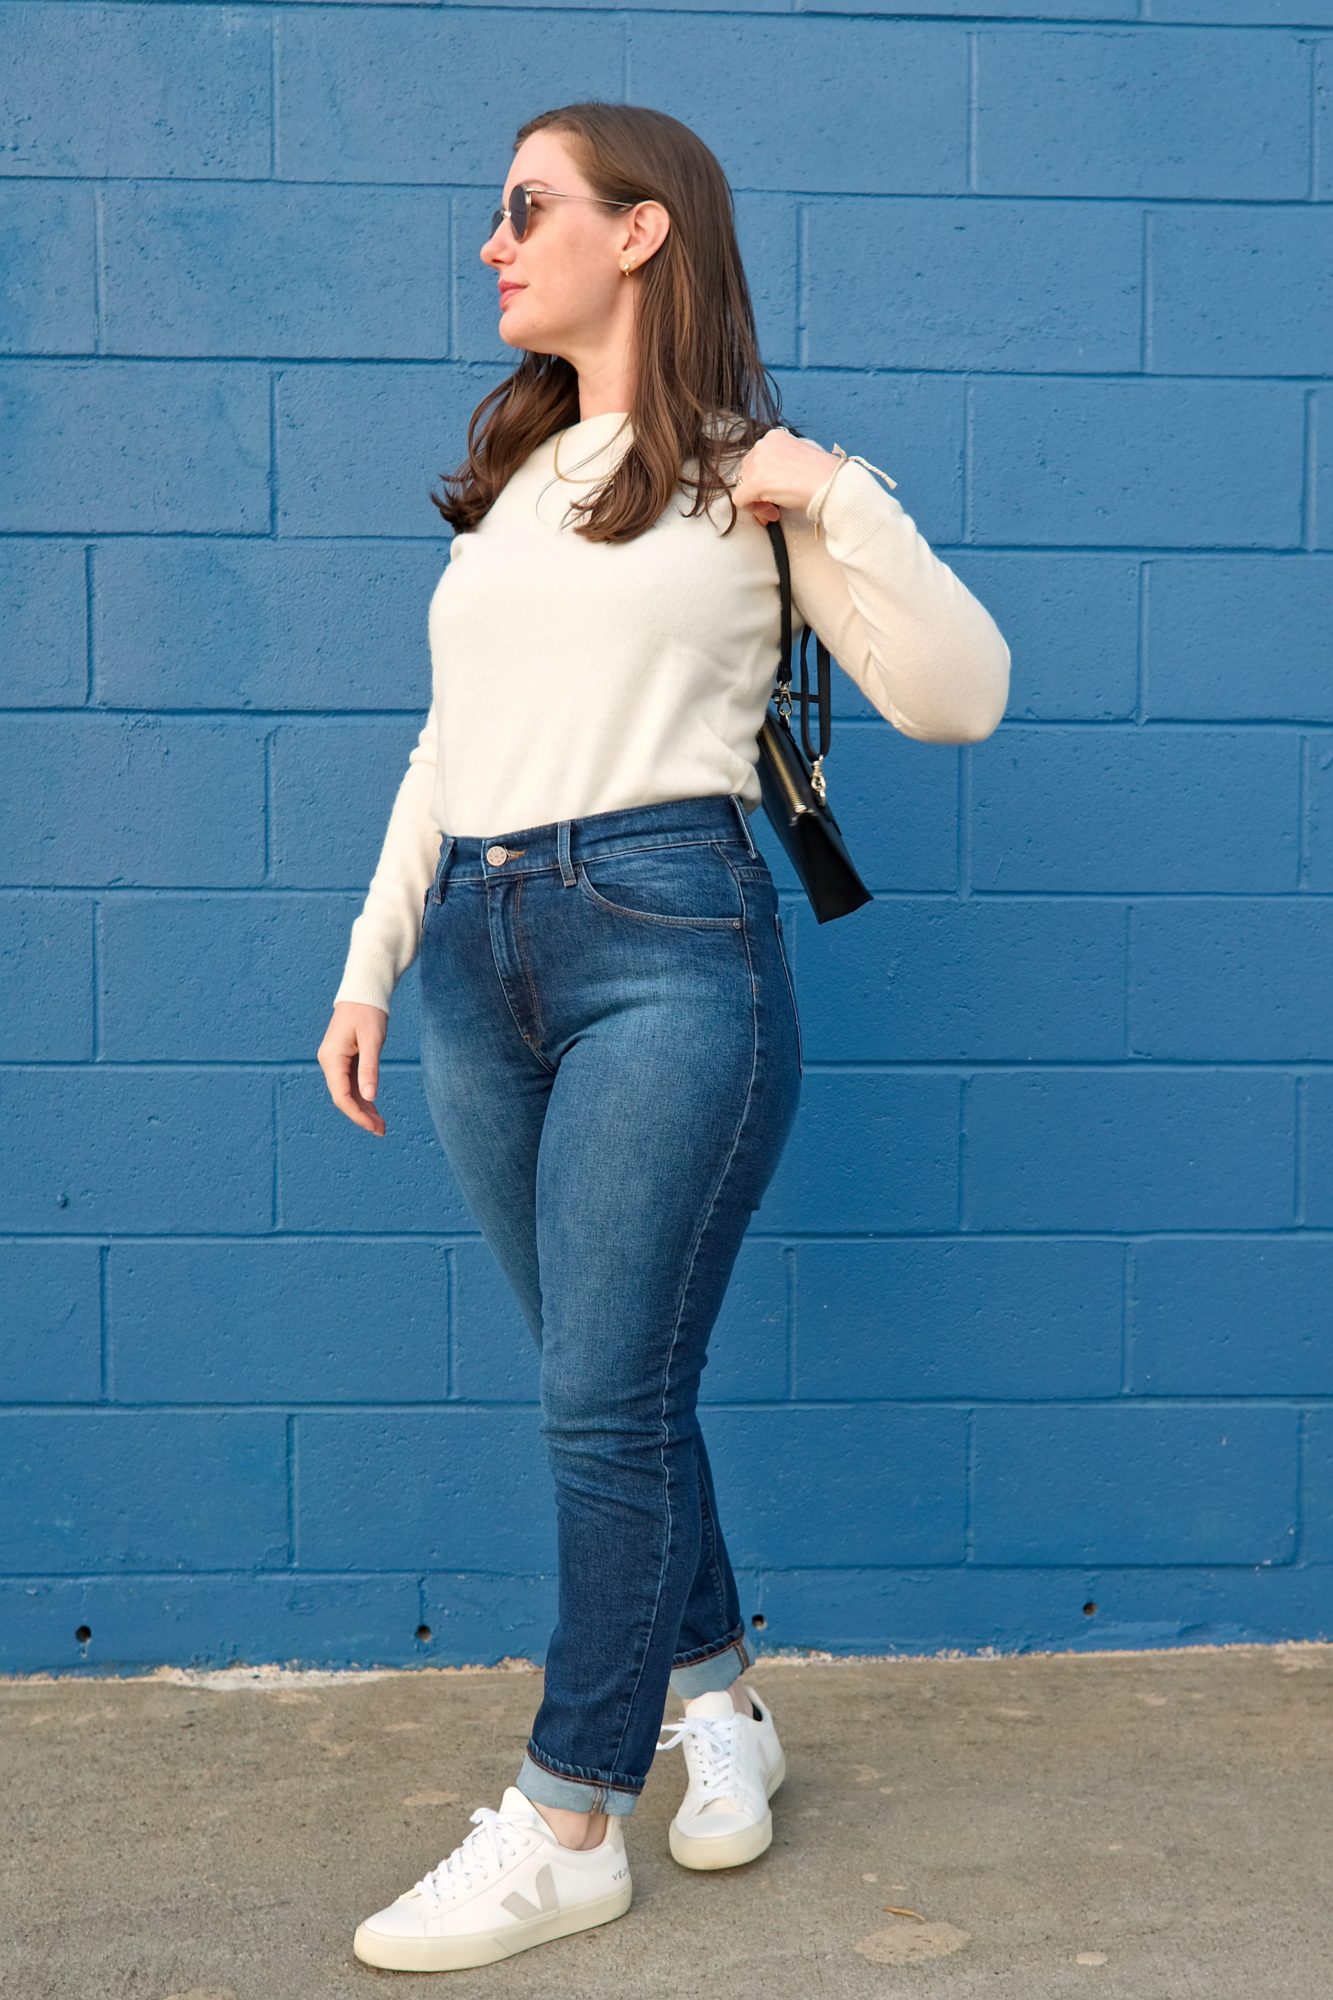 Alyssa wears the cream sweater from Mott & Bow and turns at an angle